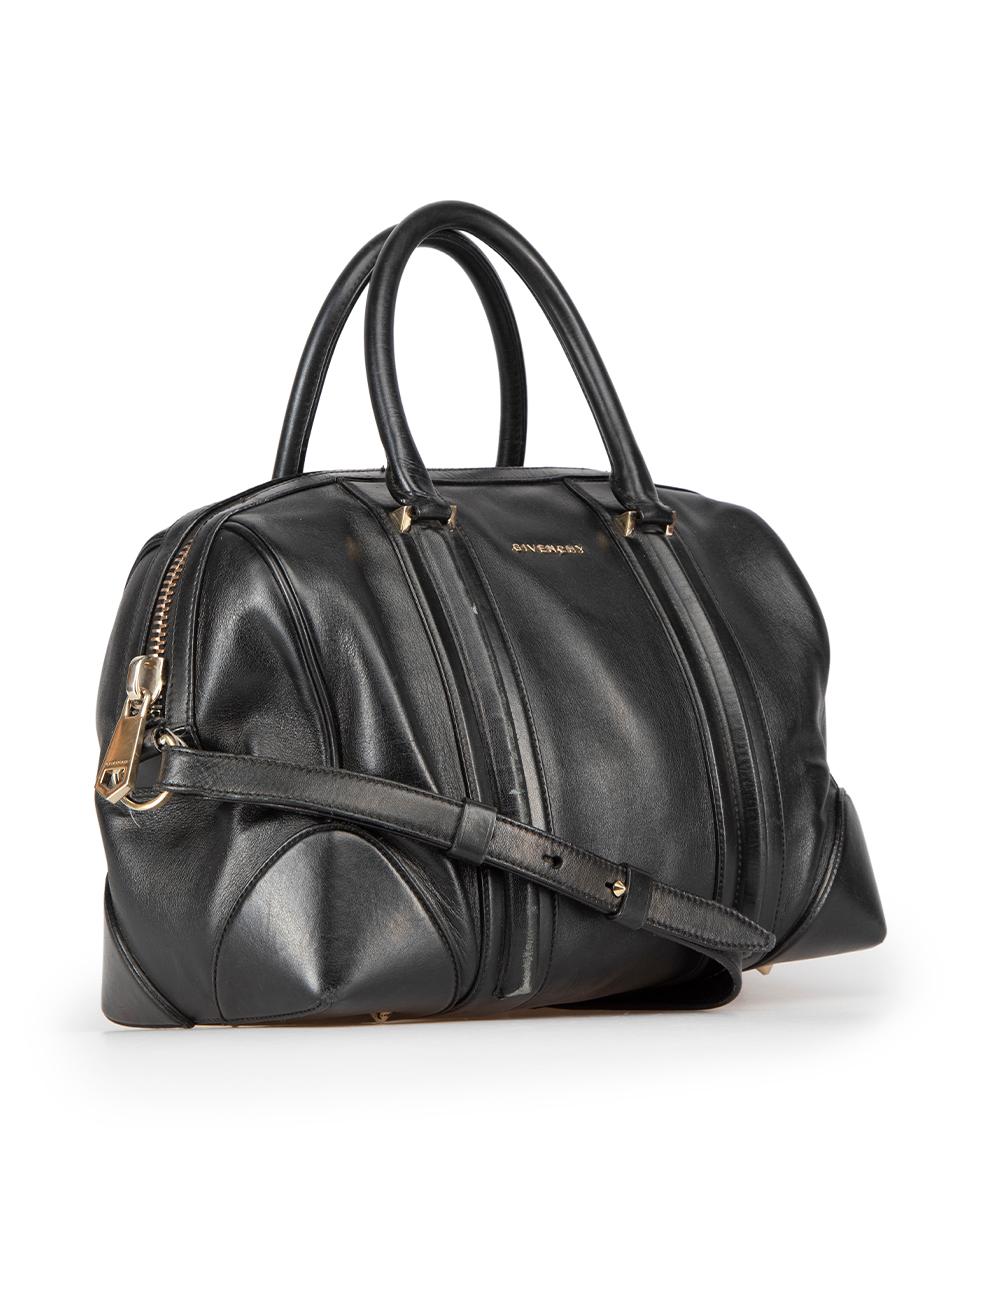 CONDITION is Good. General wear to bag is evident. Moderate signs of wear to leather exterior with noticeable abrasion found throughout, mild tarnishing of hardware components and edge paint cracking. Some stray thread ends can also be seen and